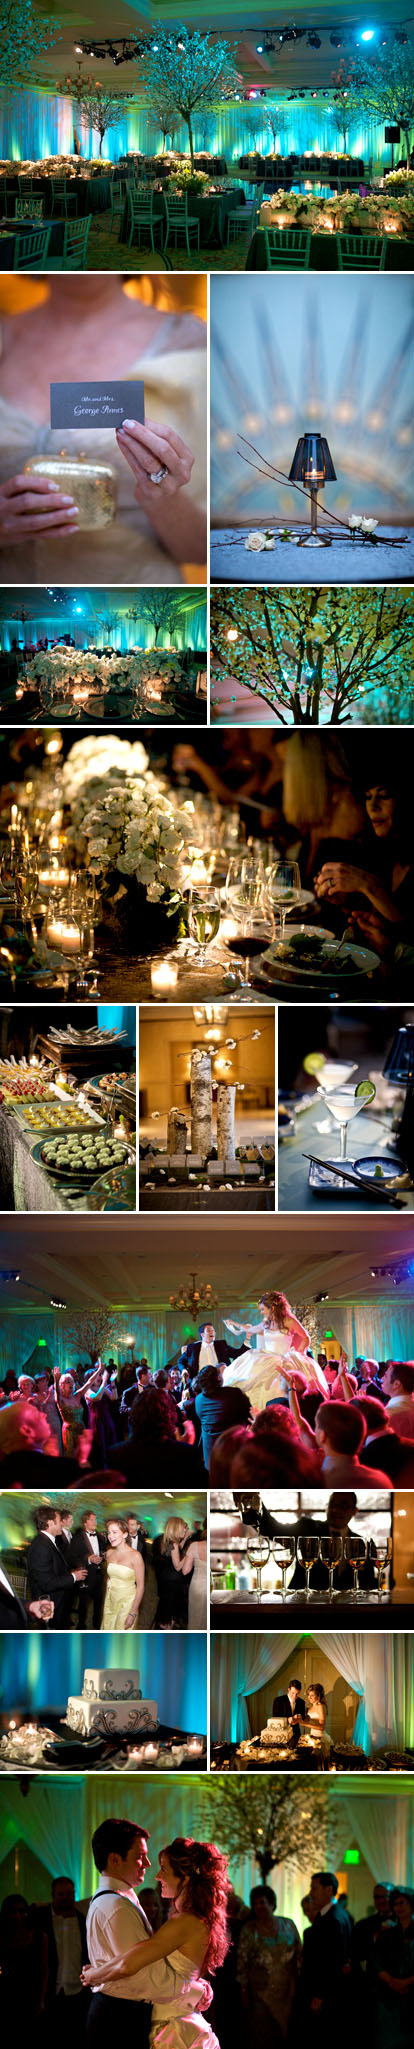 Images by Ira Lippke Studios, spring wedding reception at the Montage Laguna Beach